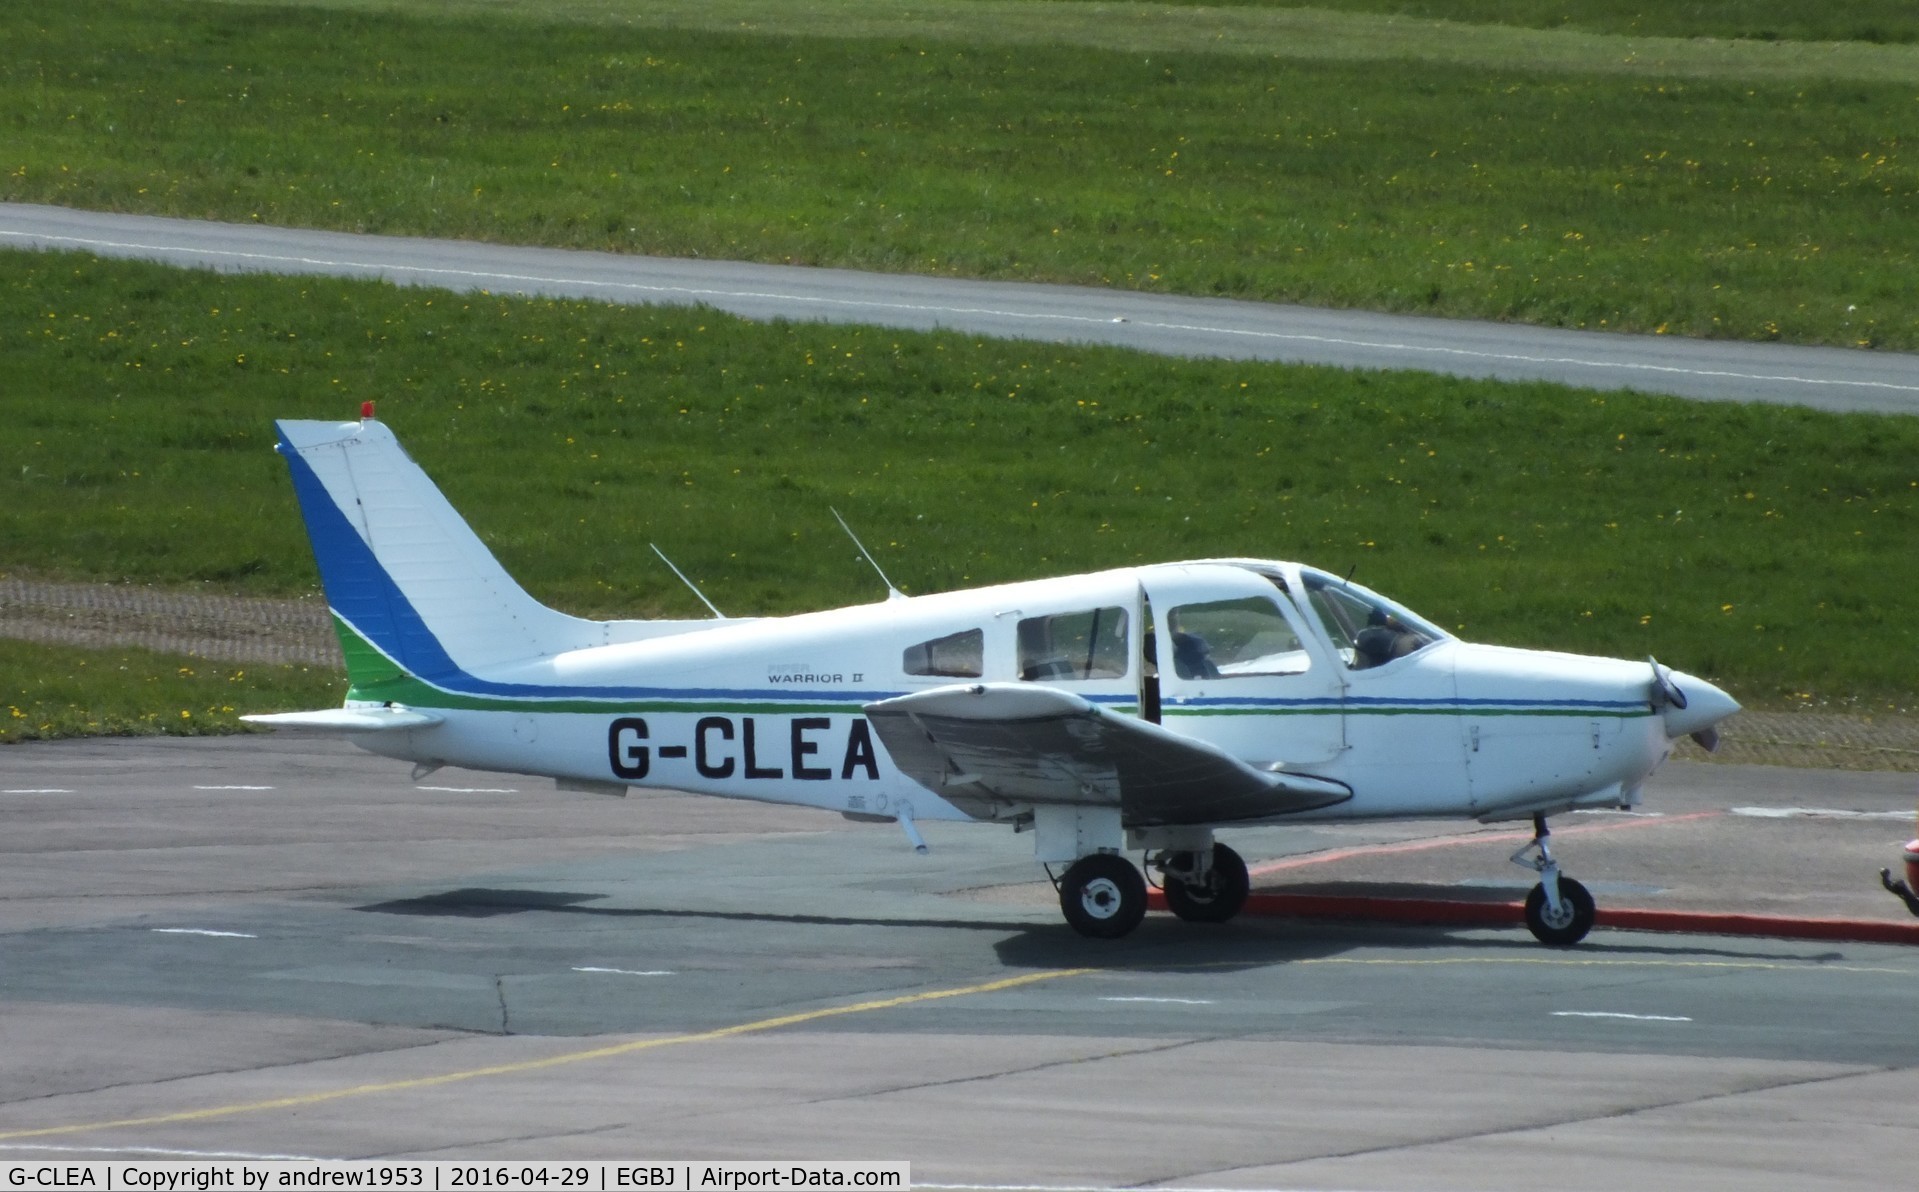 G-CLEA, 1978 Piper PA-28-161 Cherokee Warrior II C/N 28-7916081, G-CLEA at Gloucestershire Airport.